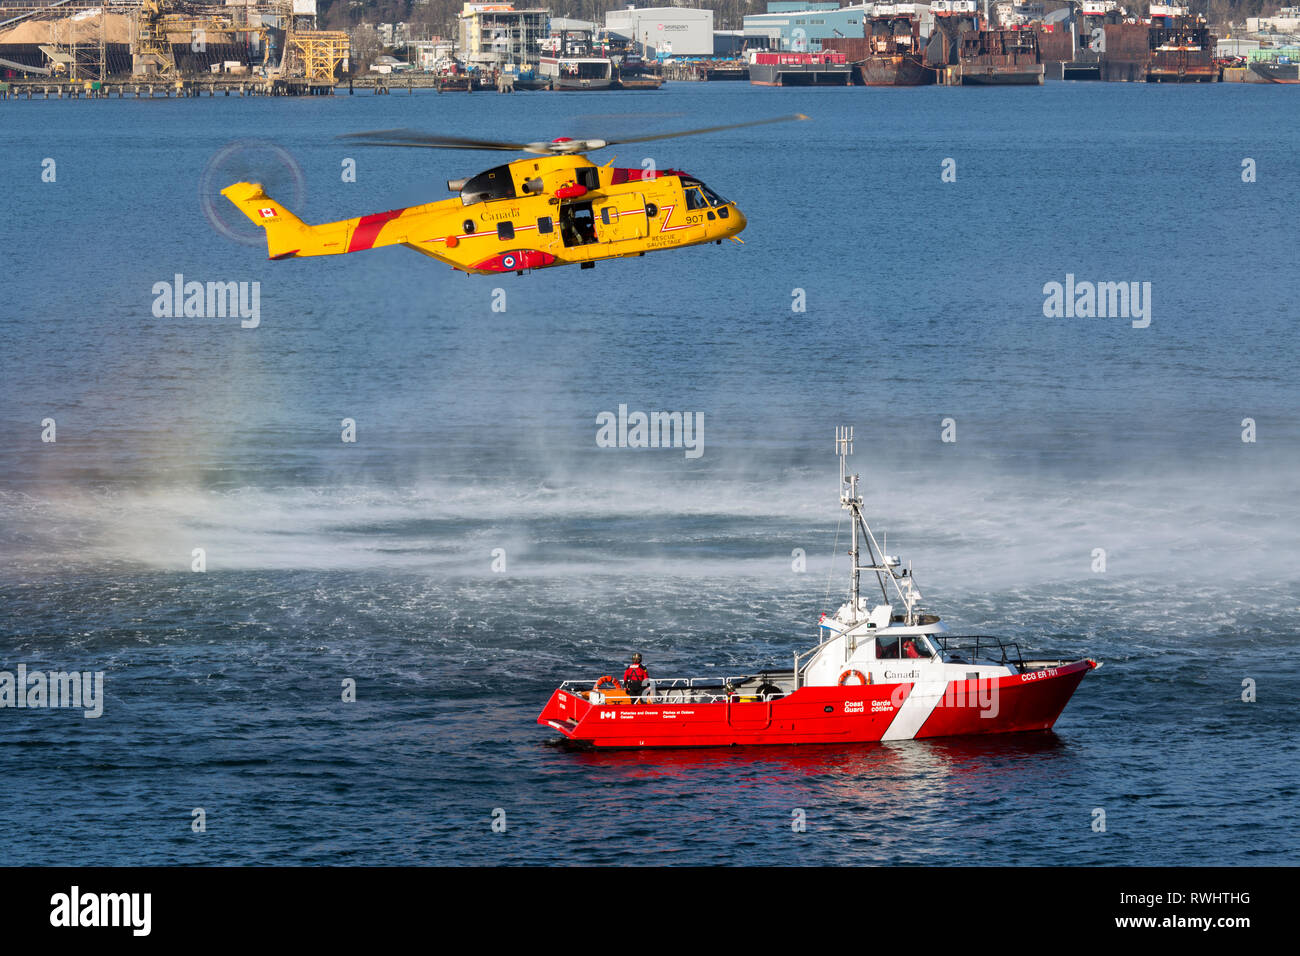 A Royal Canadian Air Force CH-148 Cormorant Helicopter hovers above a Fisheries and Oceans Canada boat during a training exercise in Vancouver Harbour, British Columbia, Canada. Stock Photo